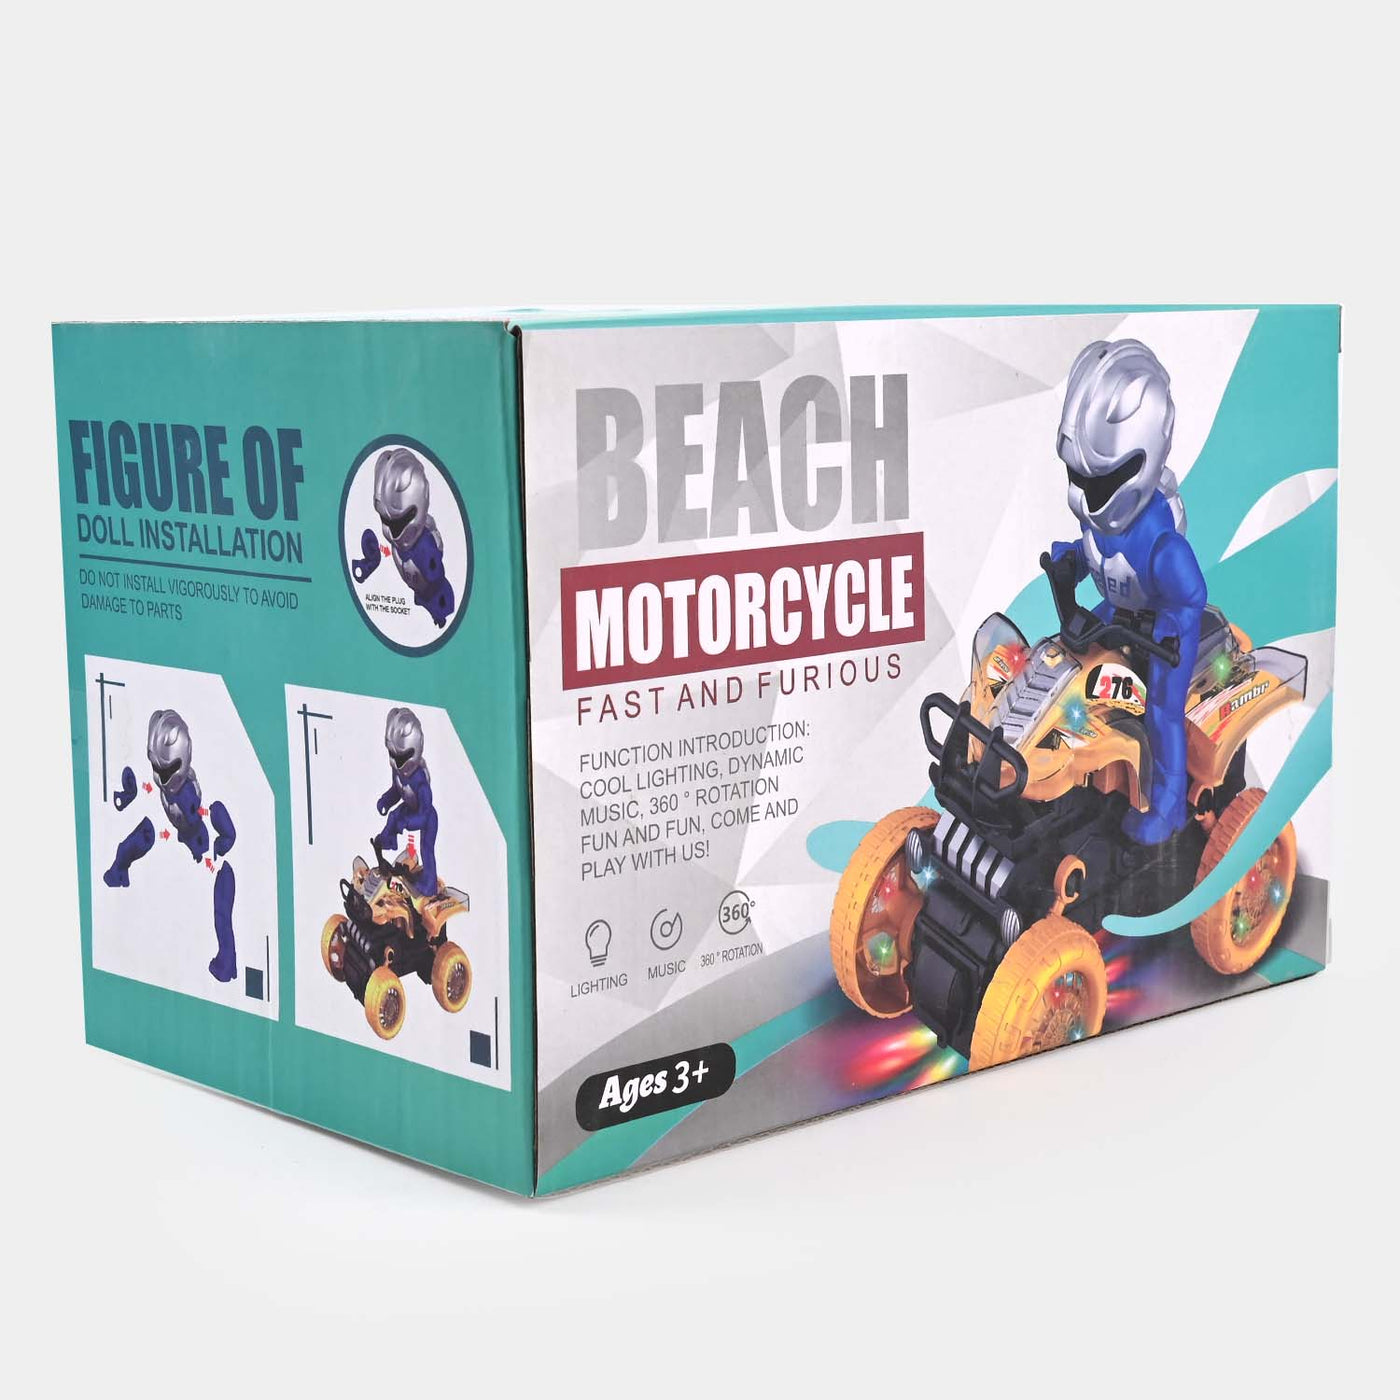 Beach Motorcycle With Music & Light For Kids